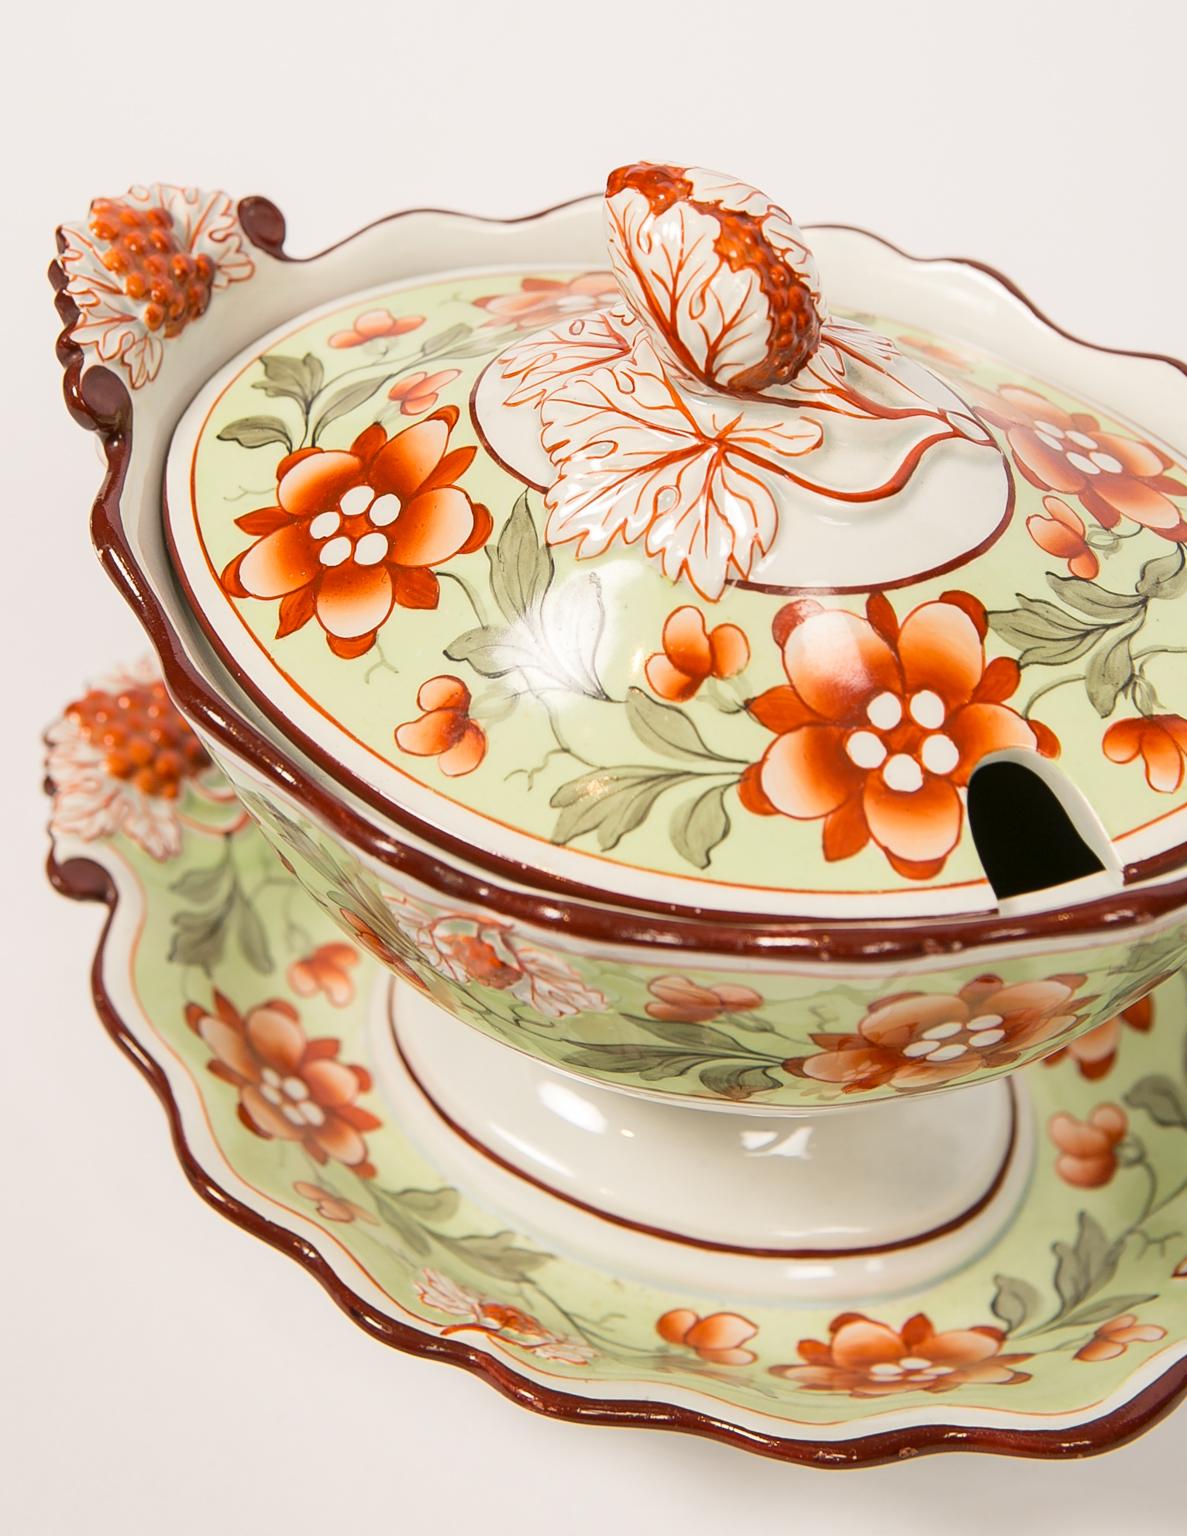 19th Century Antique Tureen Painted in Soft Green with Orange Blossoms & Berries England 1830